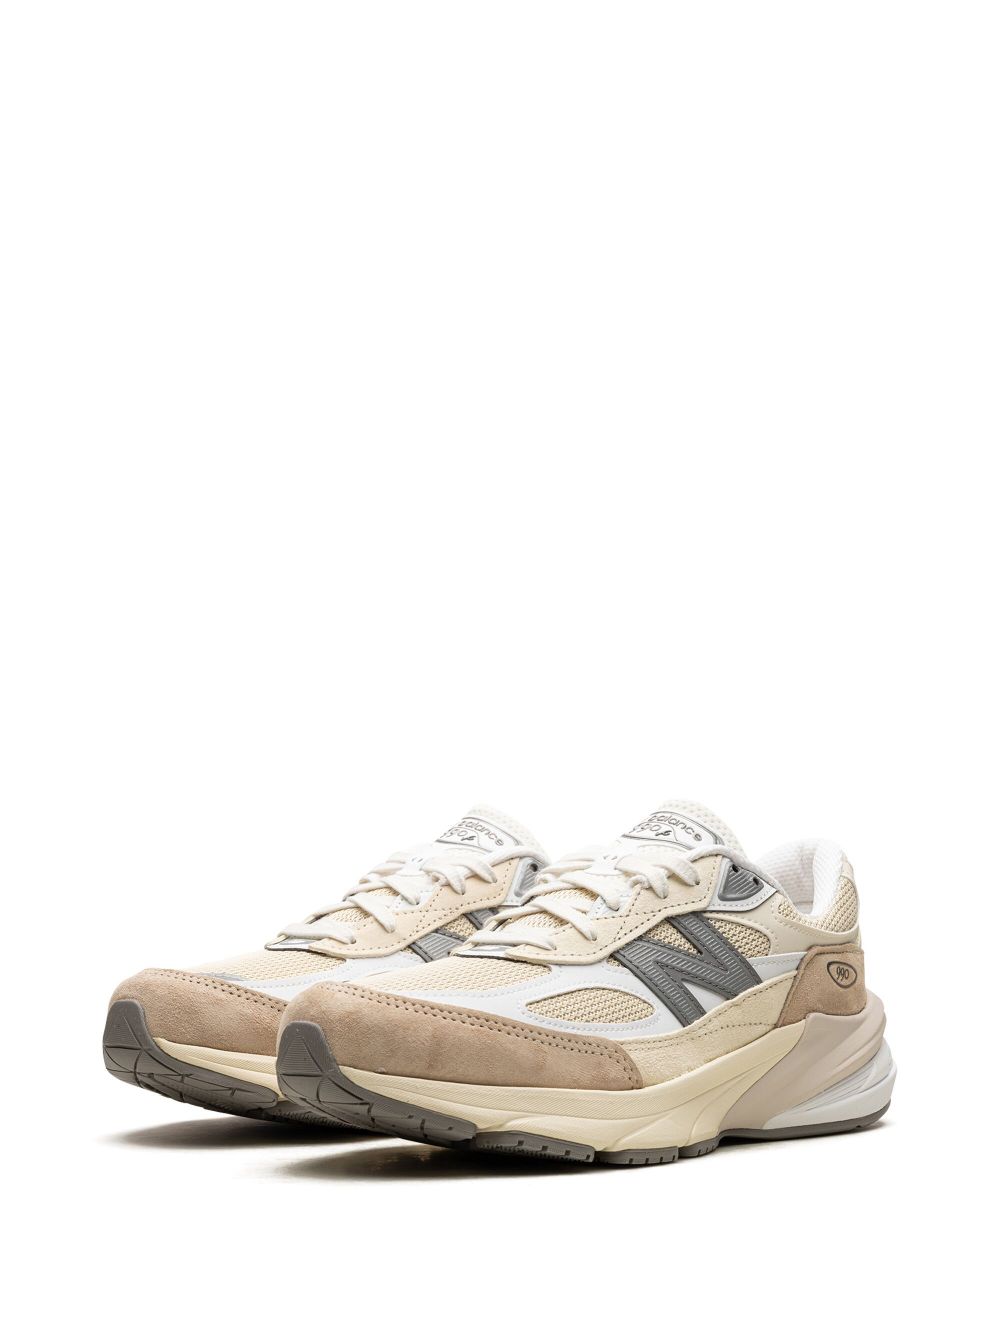 New Balance Made in USA 990v6 "Cream" sneakers Neutrals